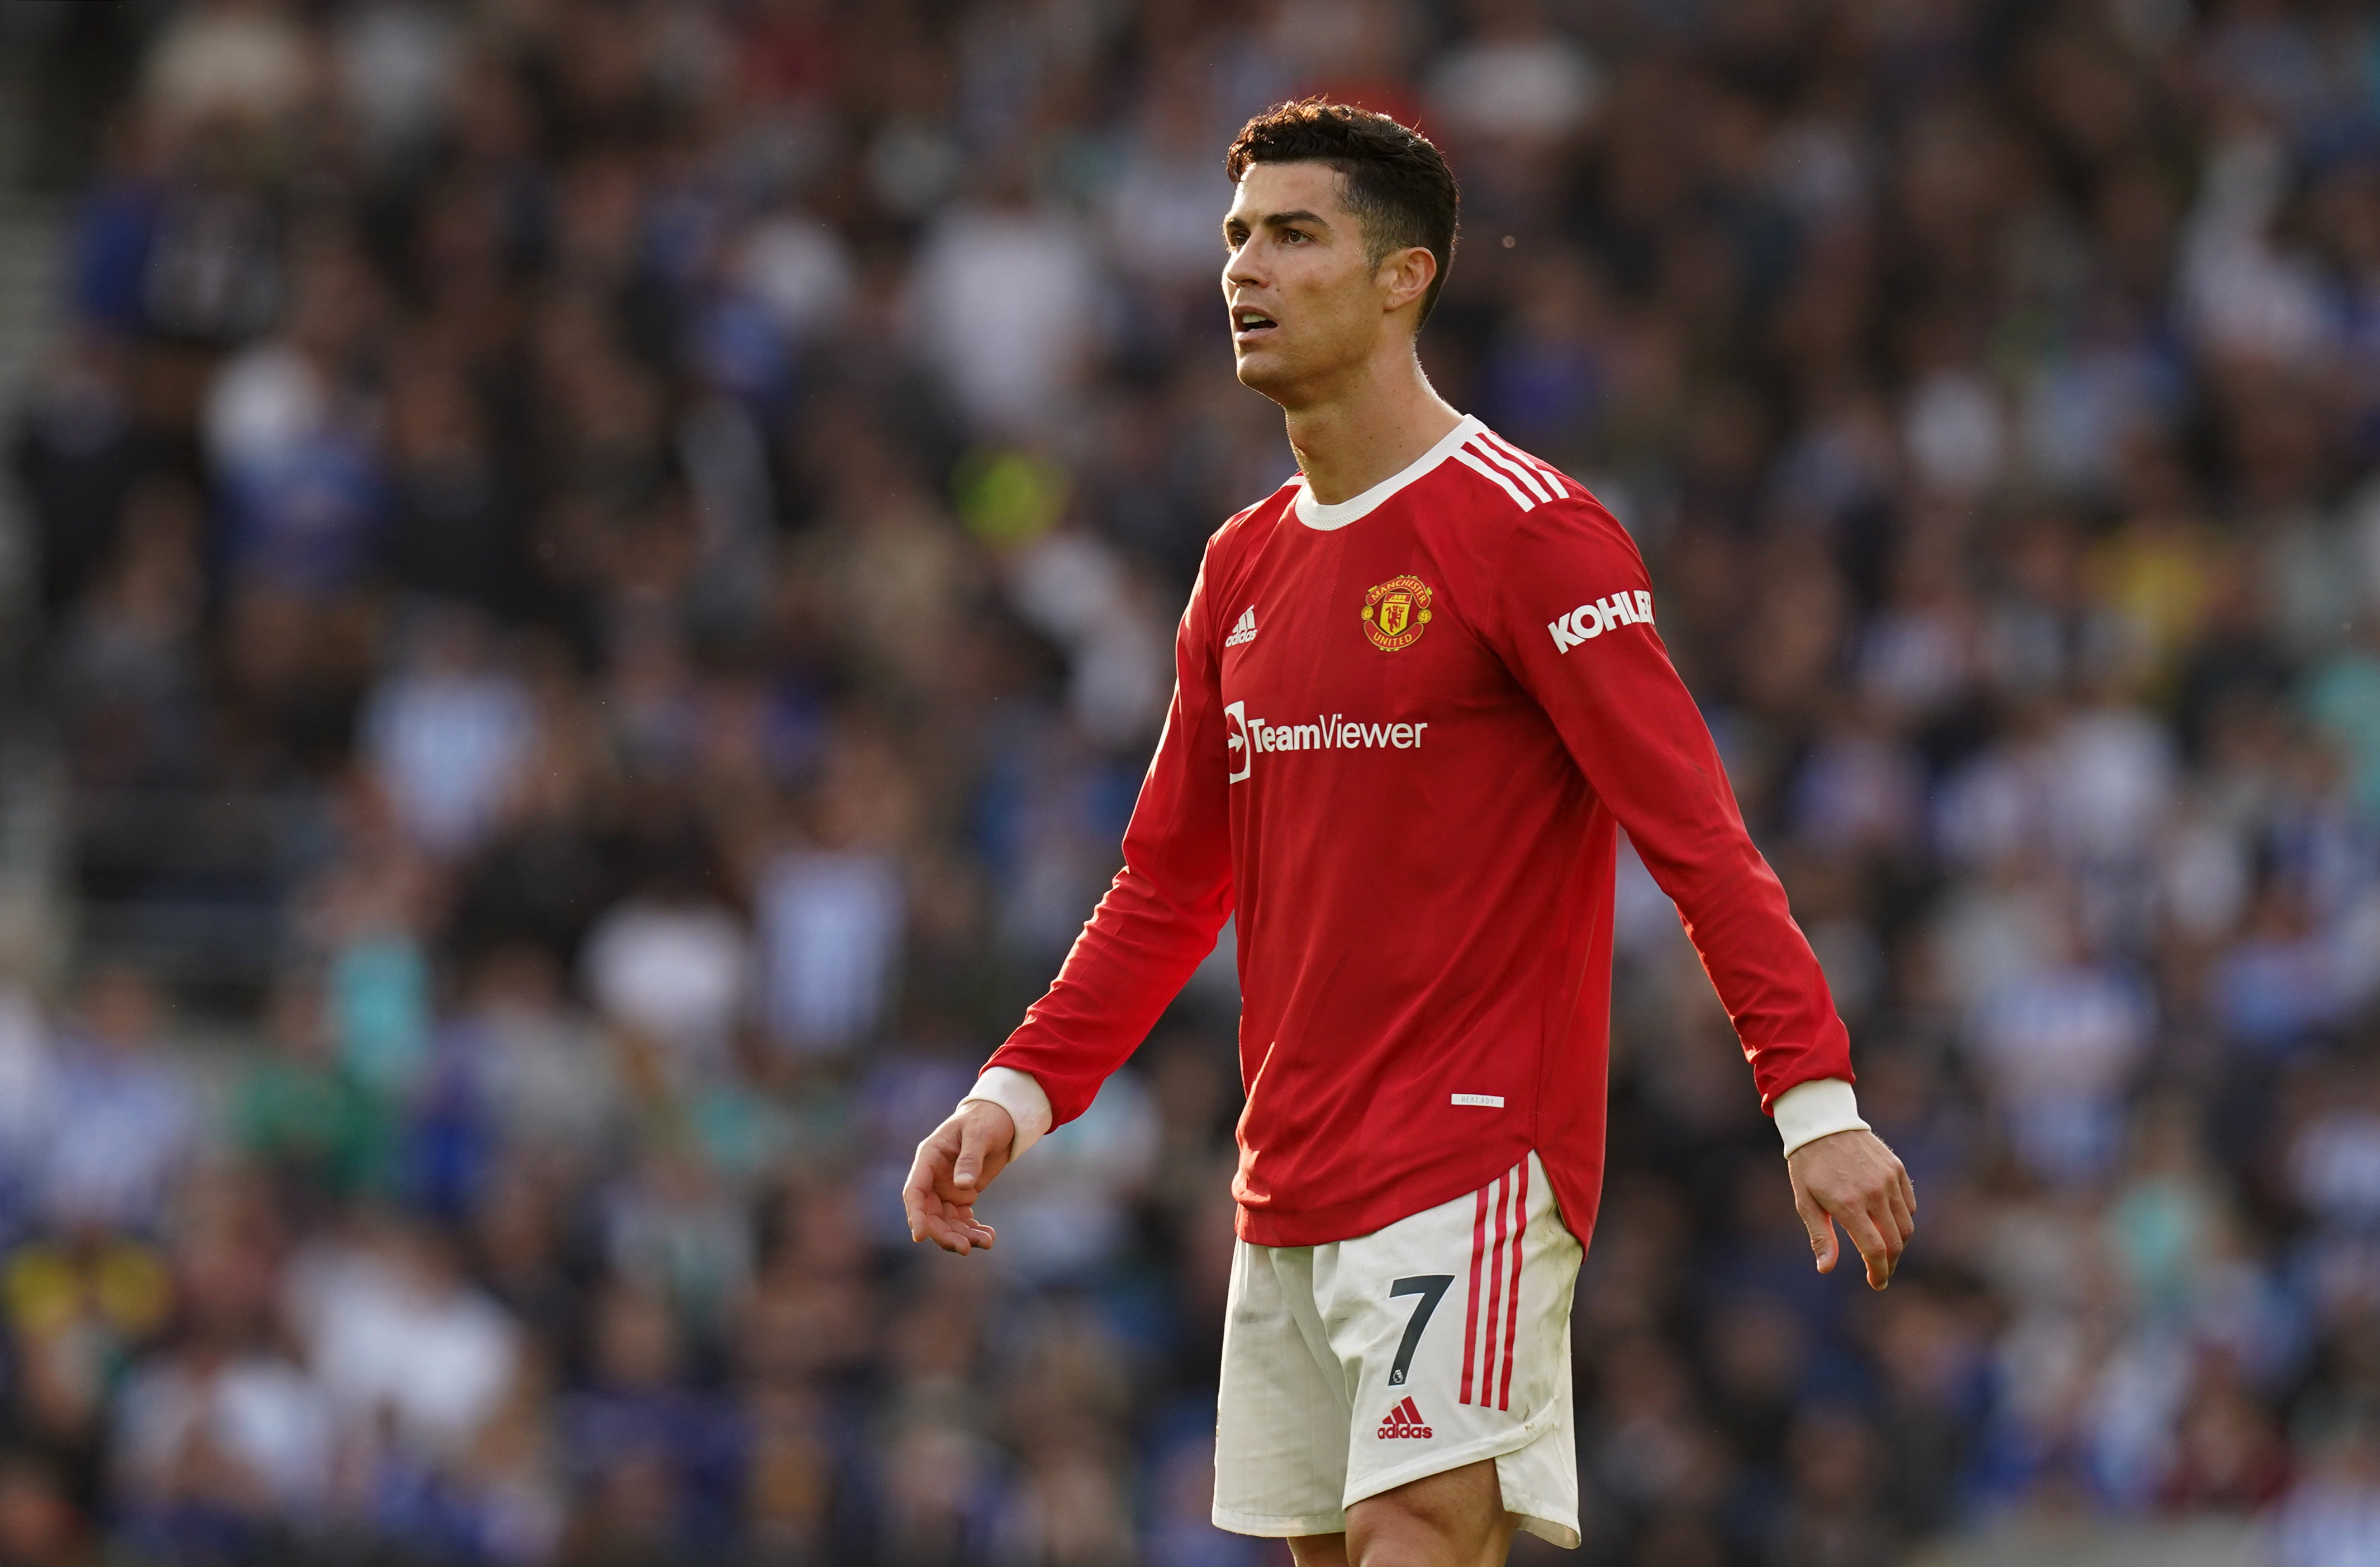 Cristiano Ronaldo is believed to be looking to end his second spell at Old Trafford (Gareth Fuller/PA)